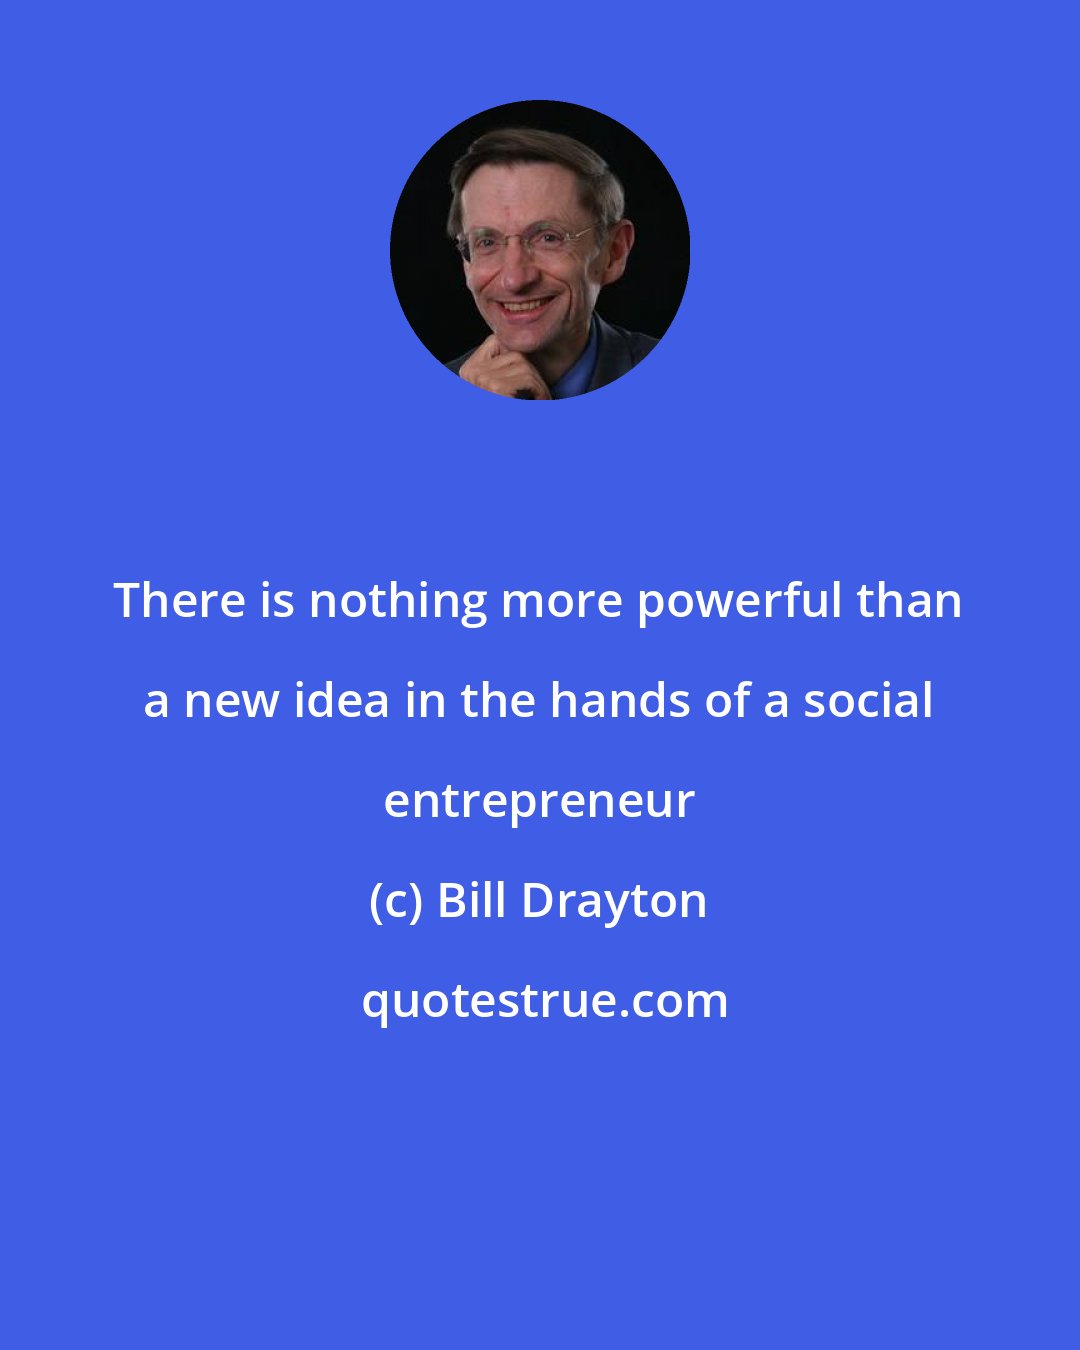 Bill Drayton: There is nothing more powerful than a new idea in the hands of a social entrepreneur